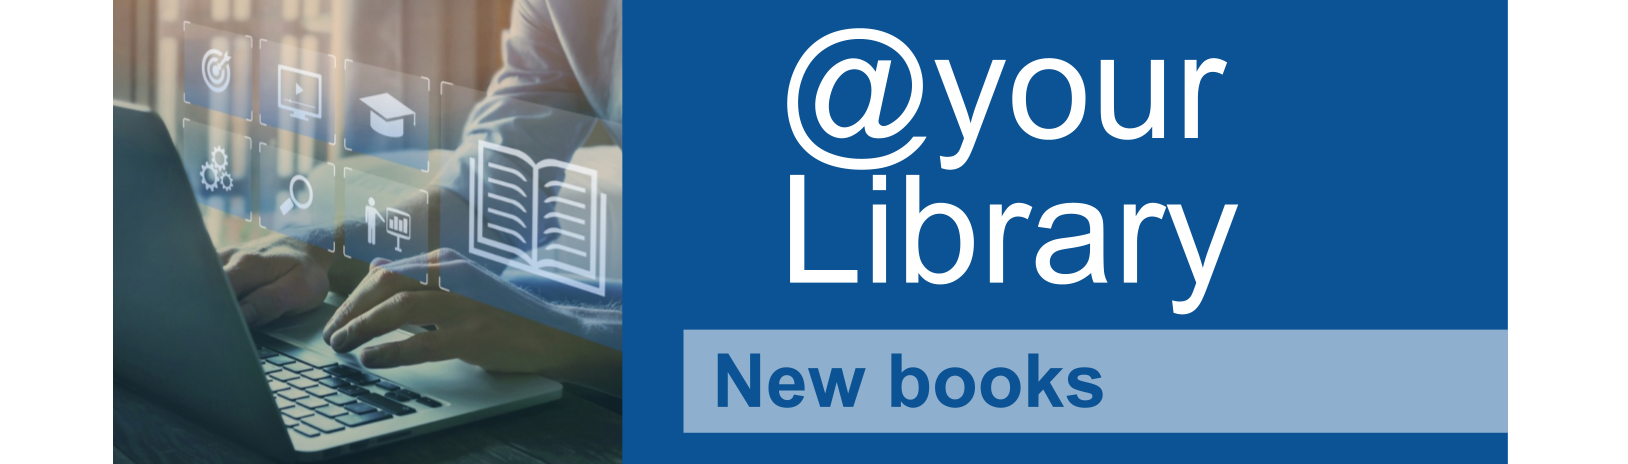 Latest news from Library Services